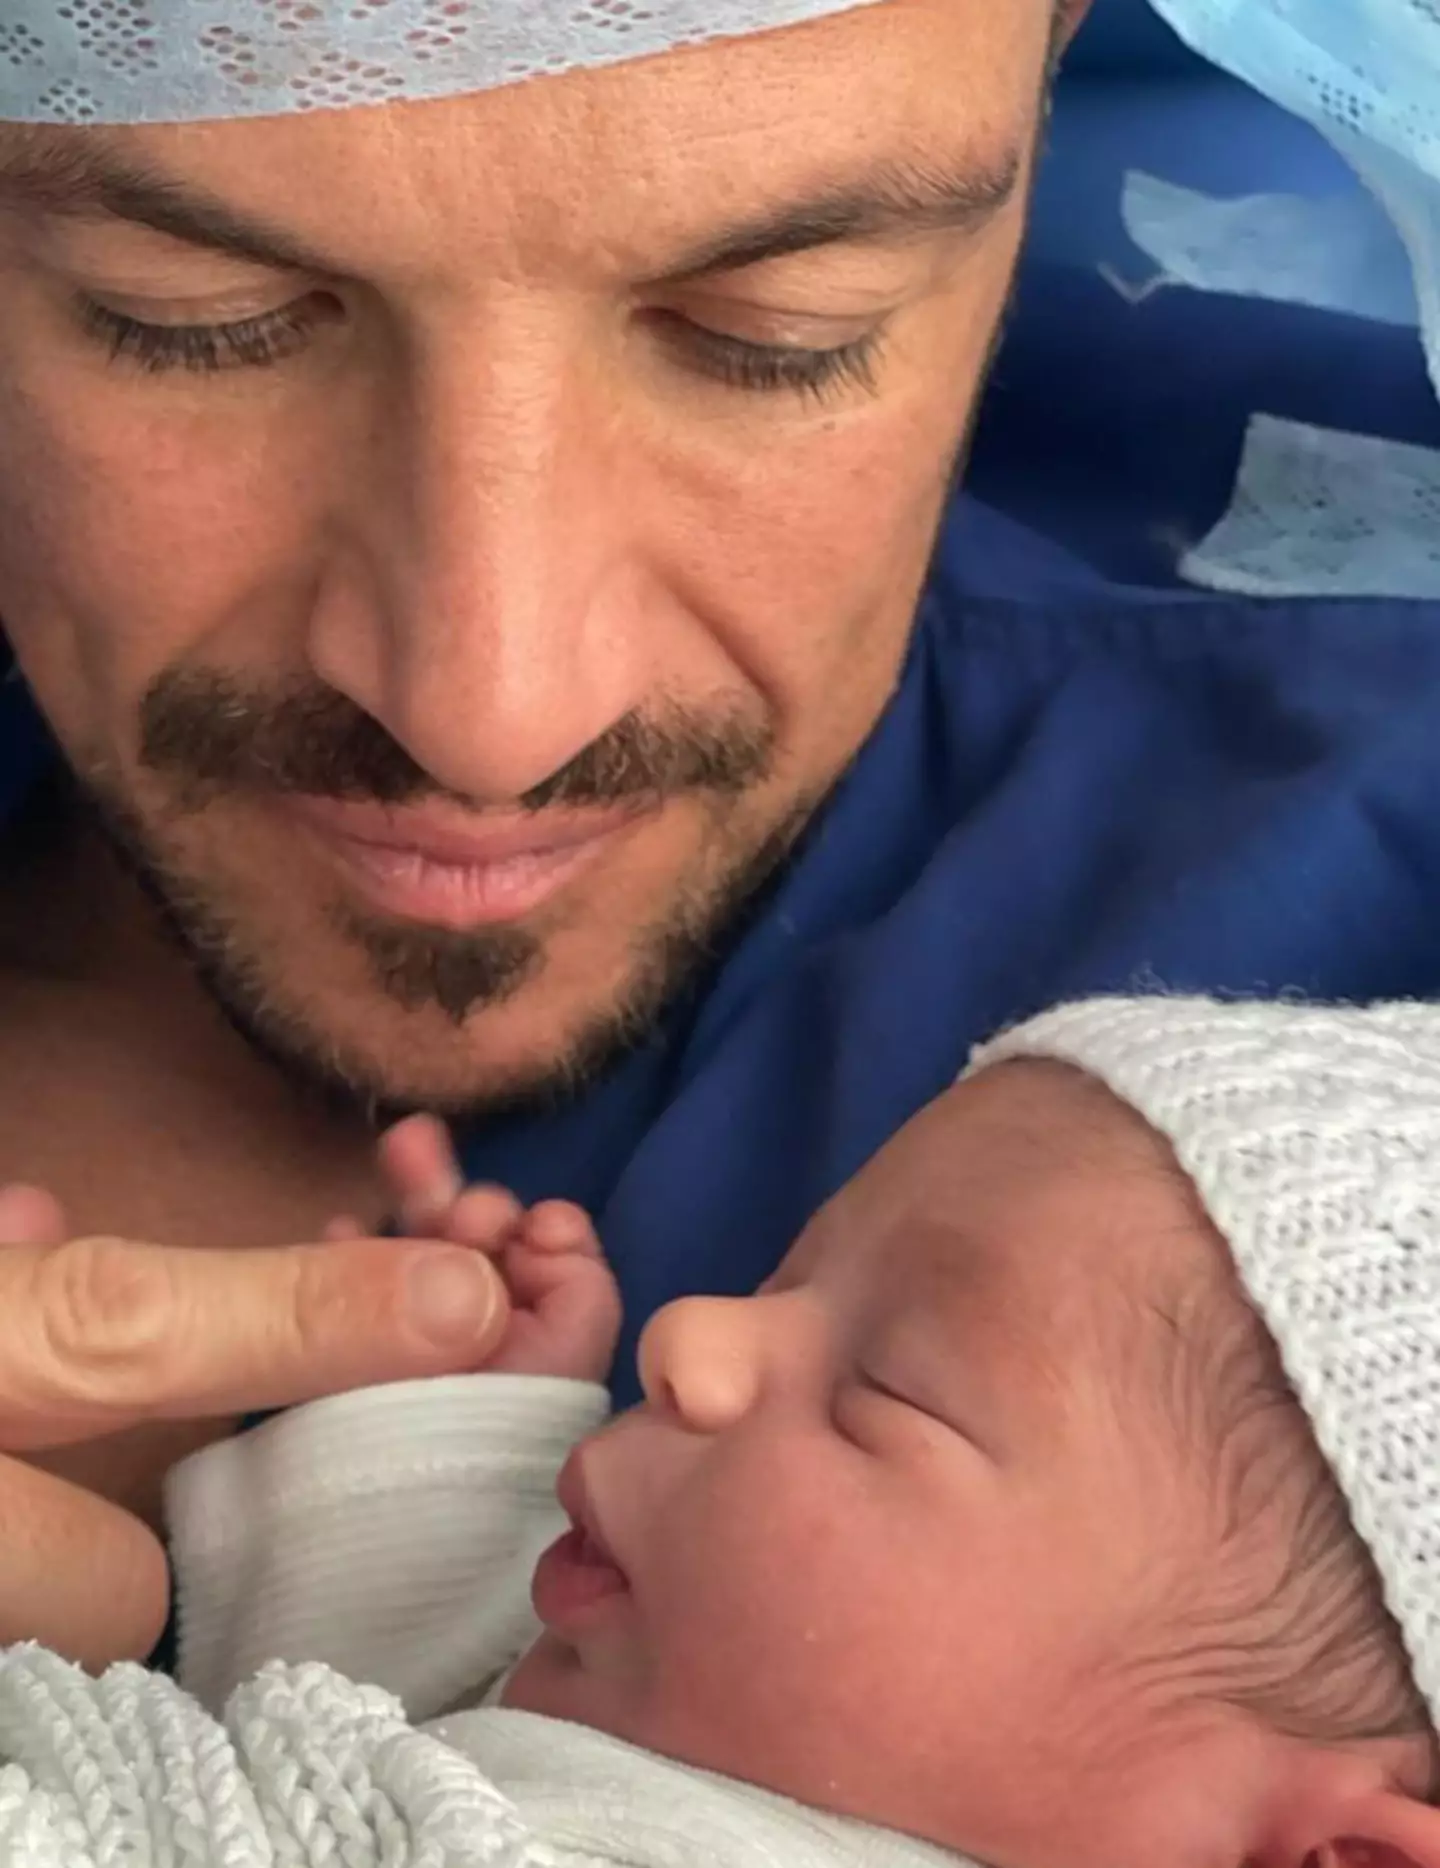 Peter Andre and his wife, Emily Macdonagh, welcomed their third child together earlier this month. (Instagram/@peterandre)